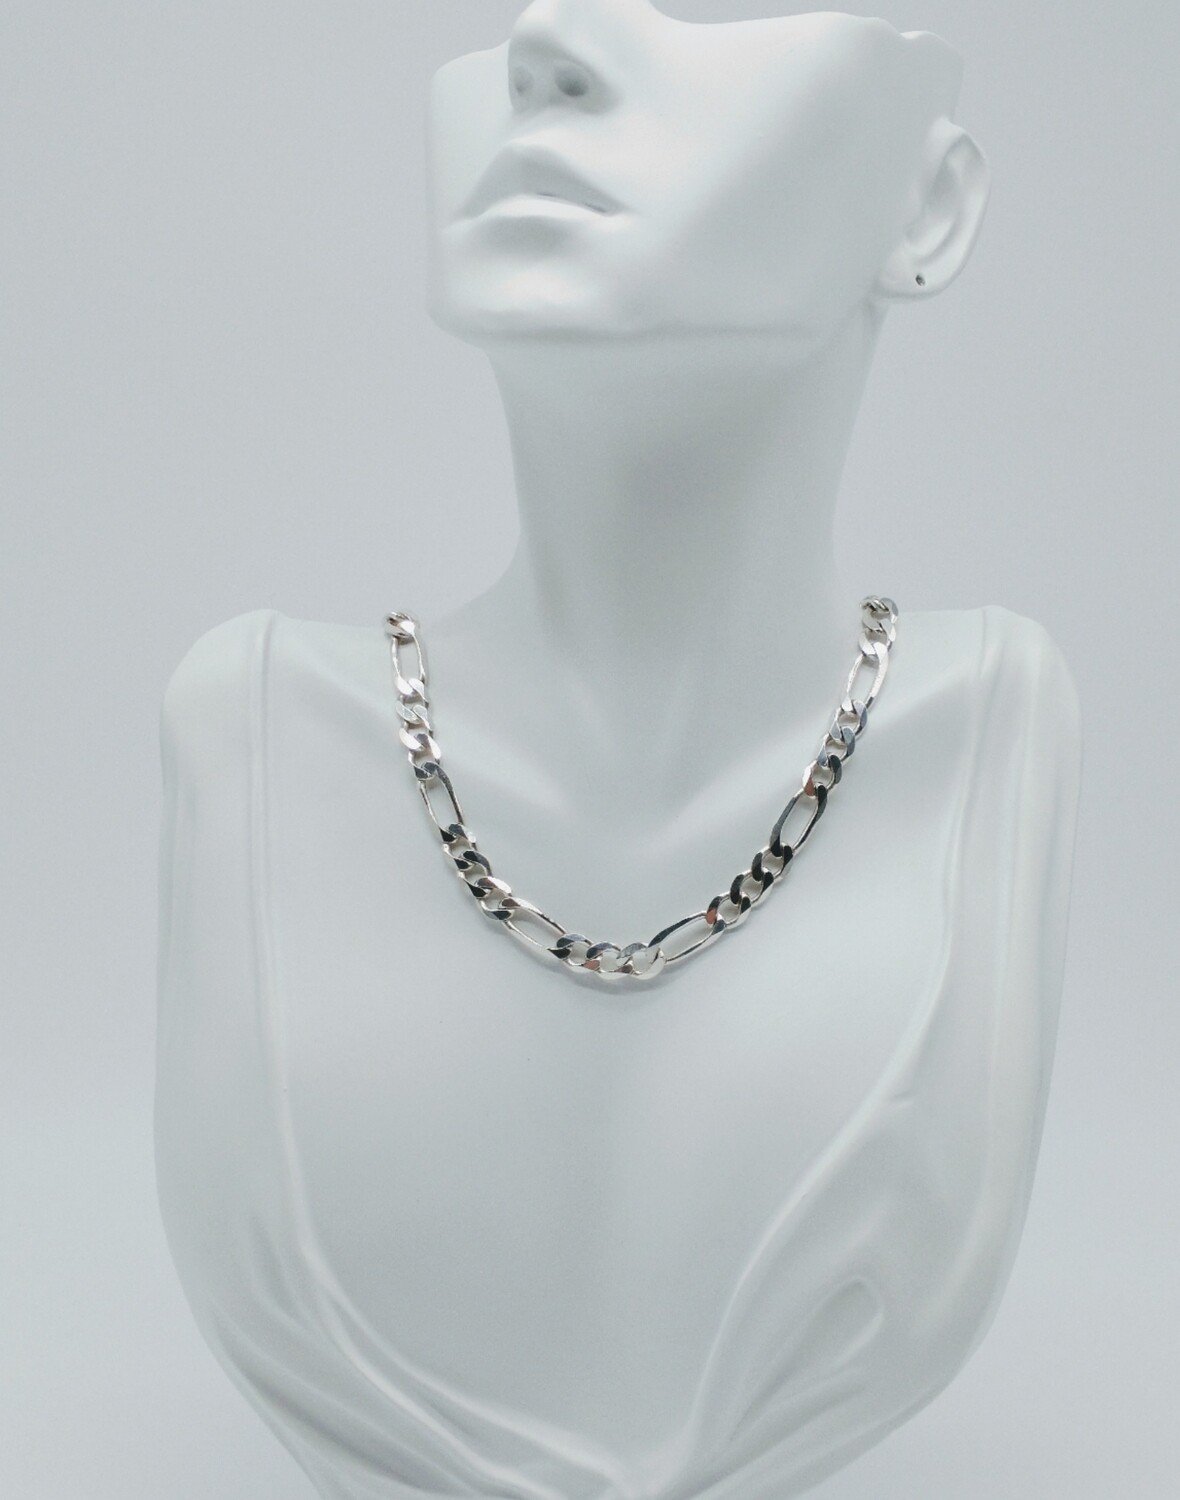 Vintage Sterling Silver 7MM Figaro Chain Necklace